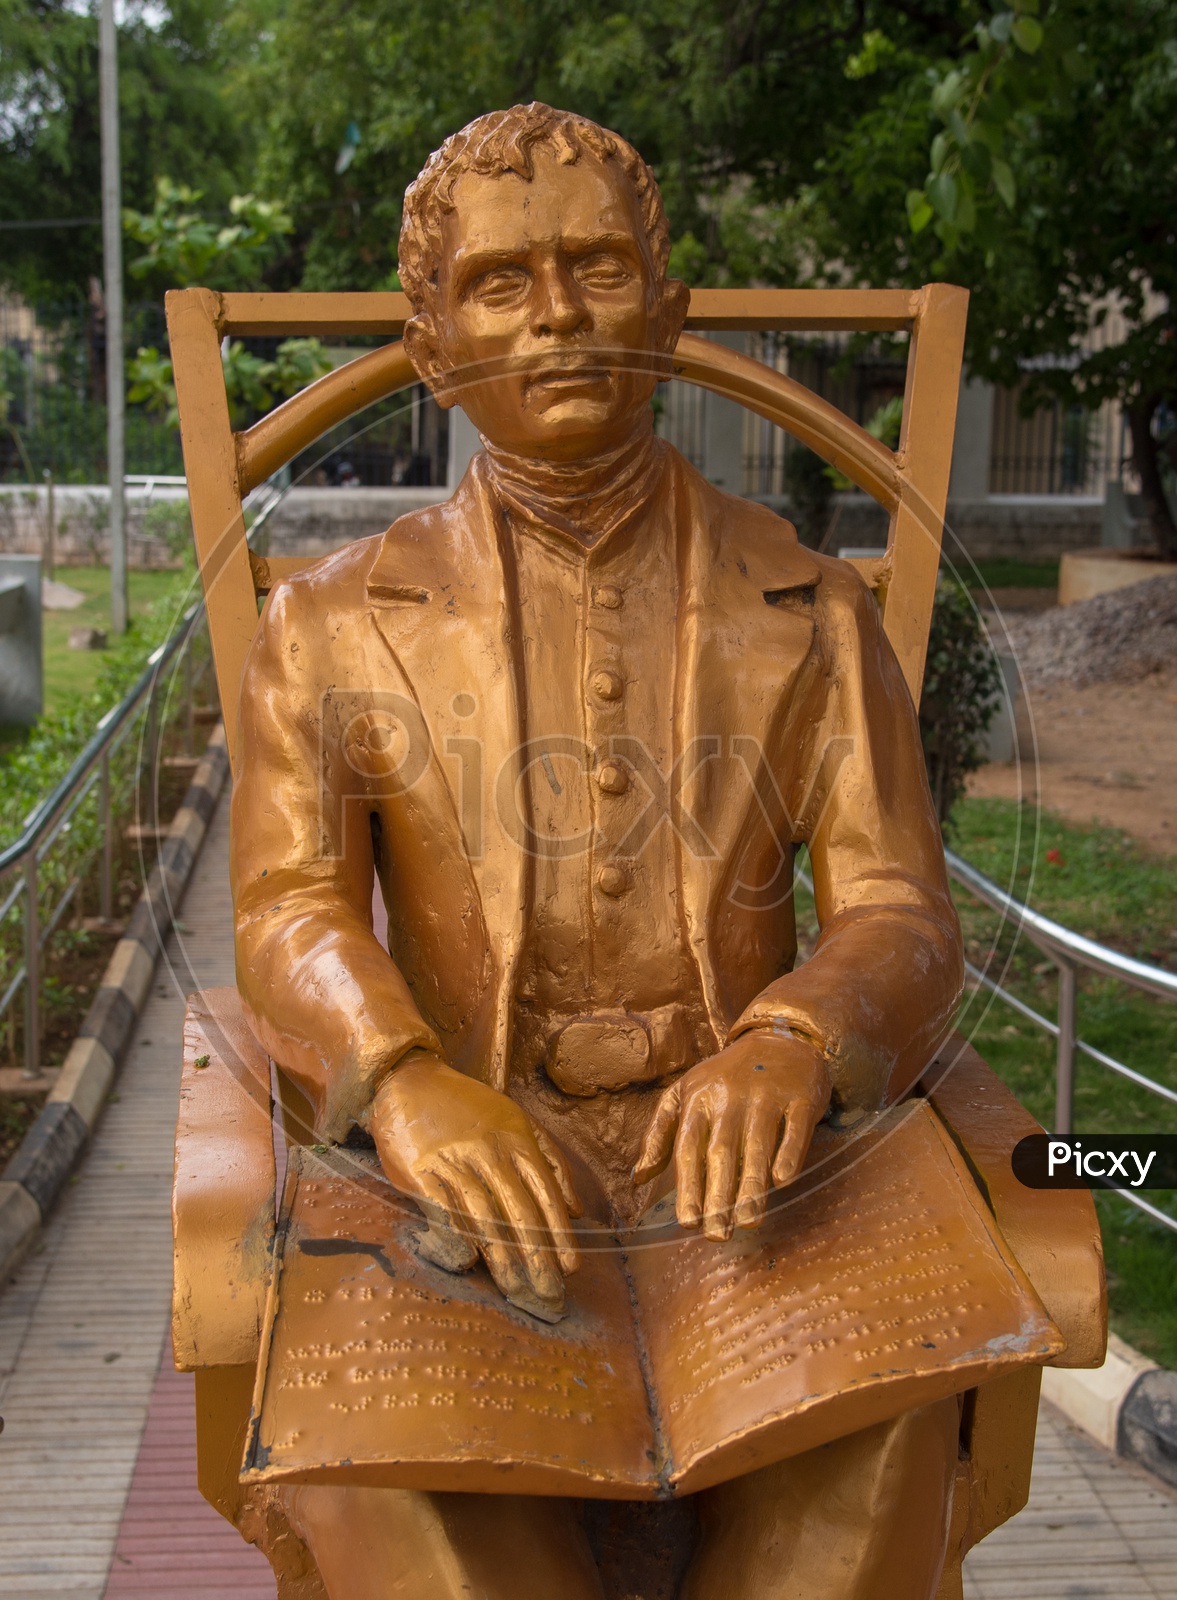 Sir Louis Braille's Statue at a Park in Hyderabad